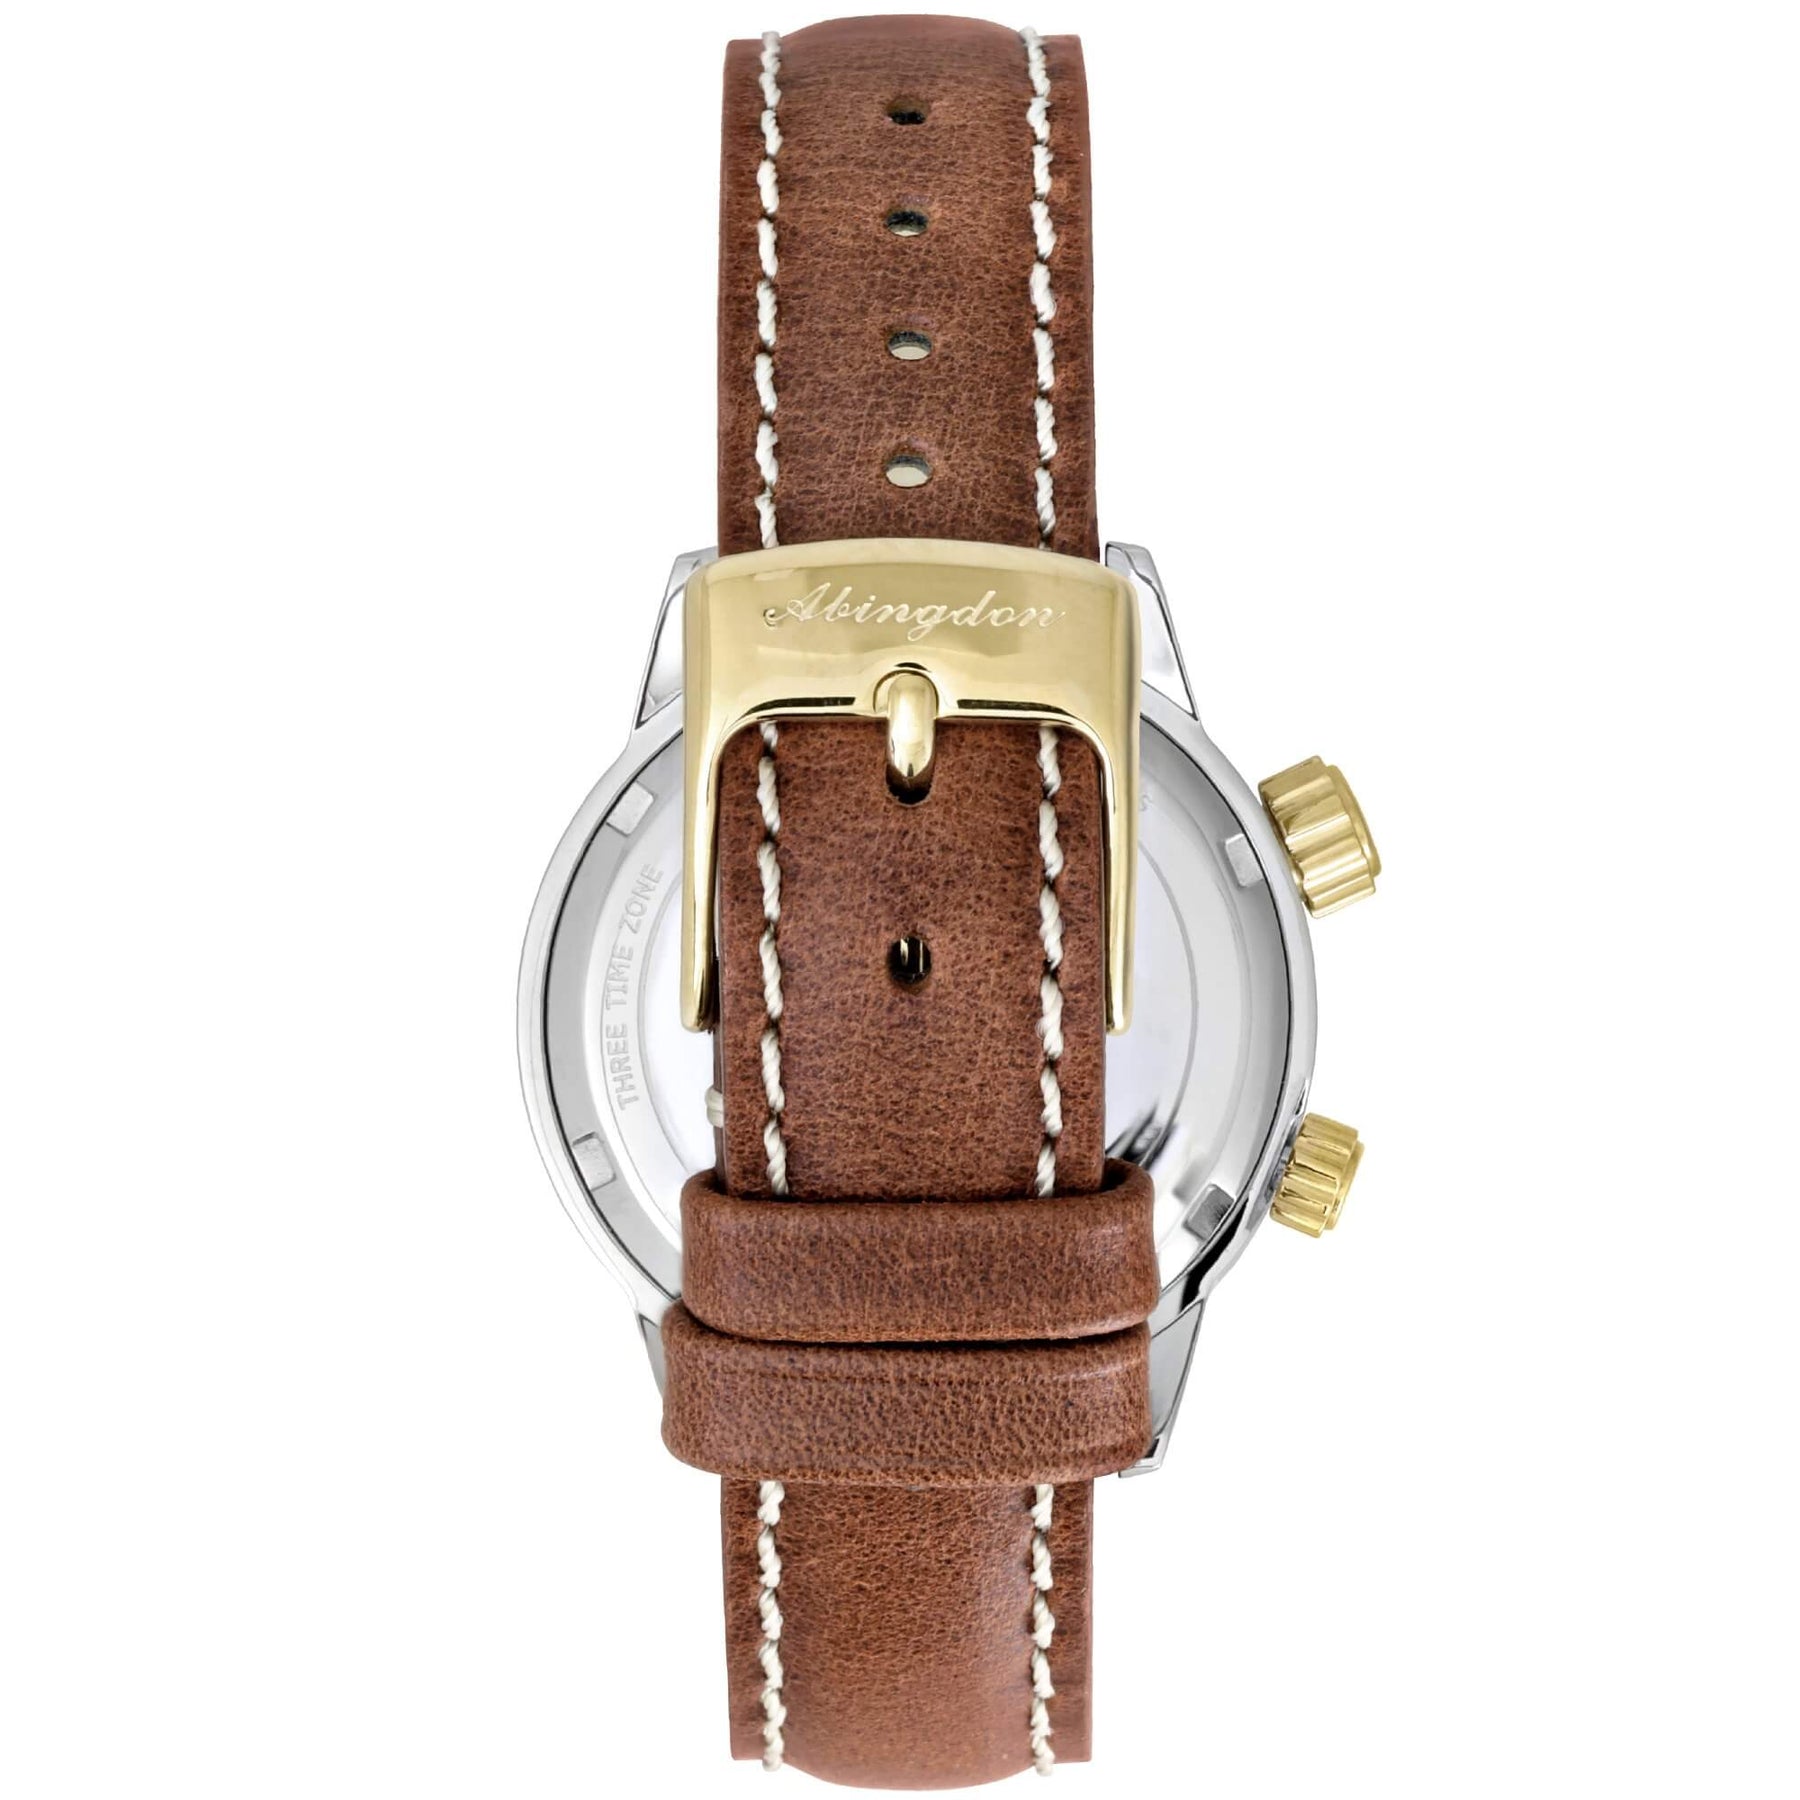 Broken strap for a Judge Brown Leather Watch?